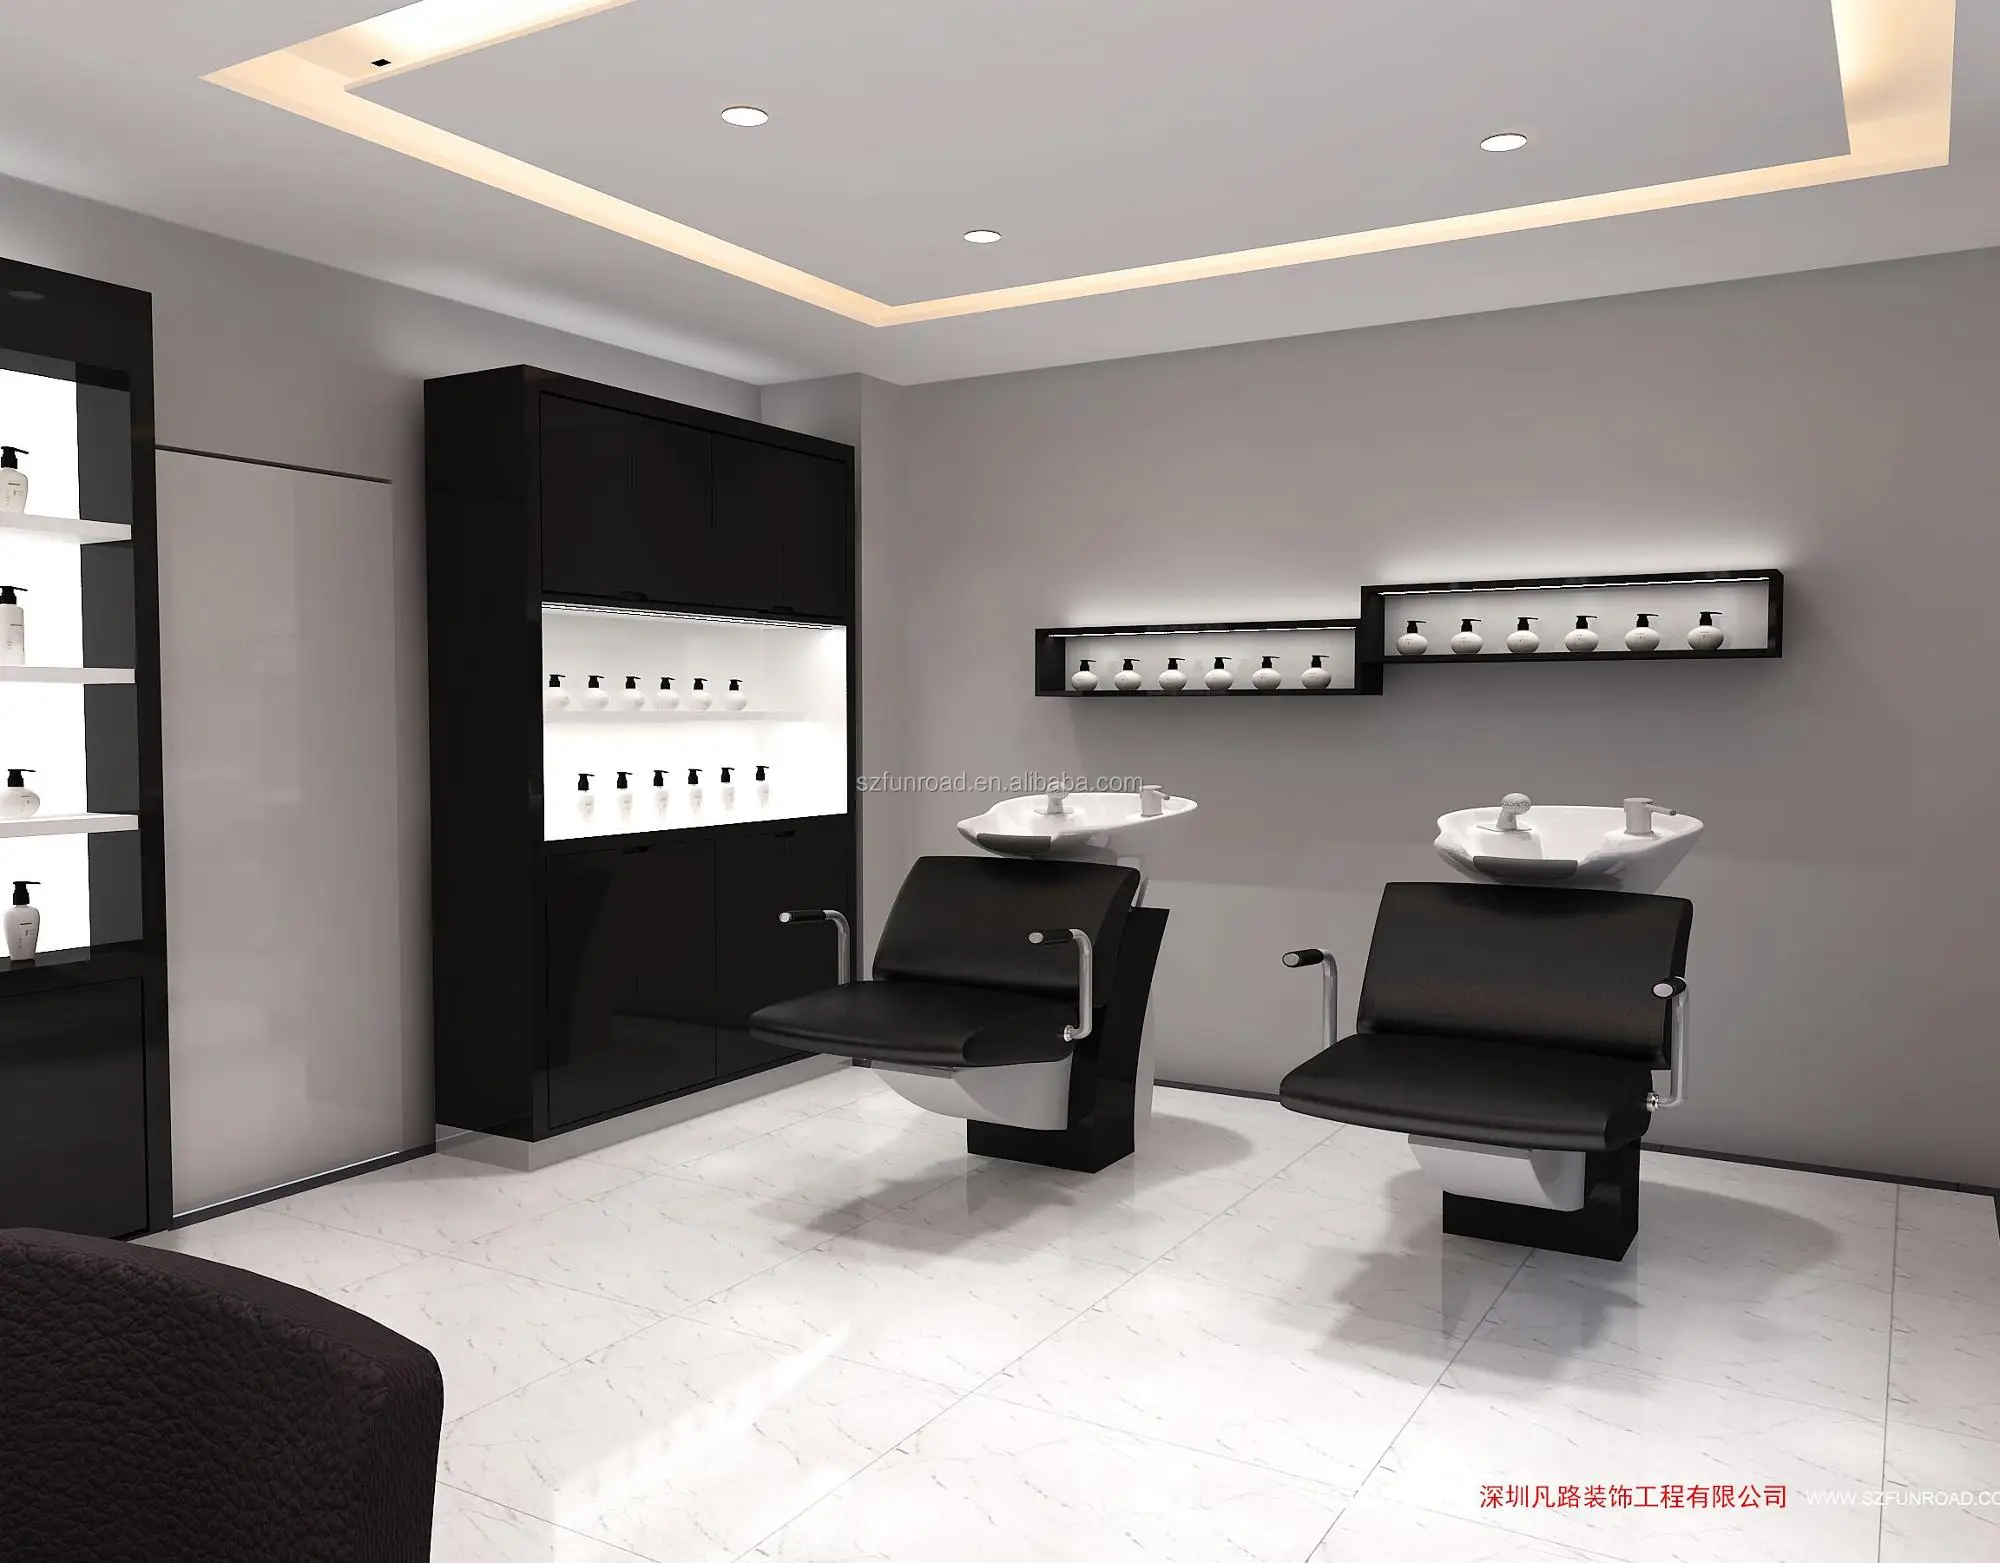 Customized wooden used hair salon furniture sale from funroad